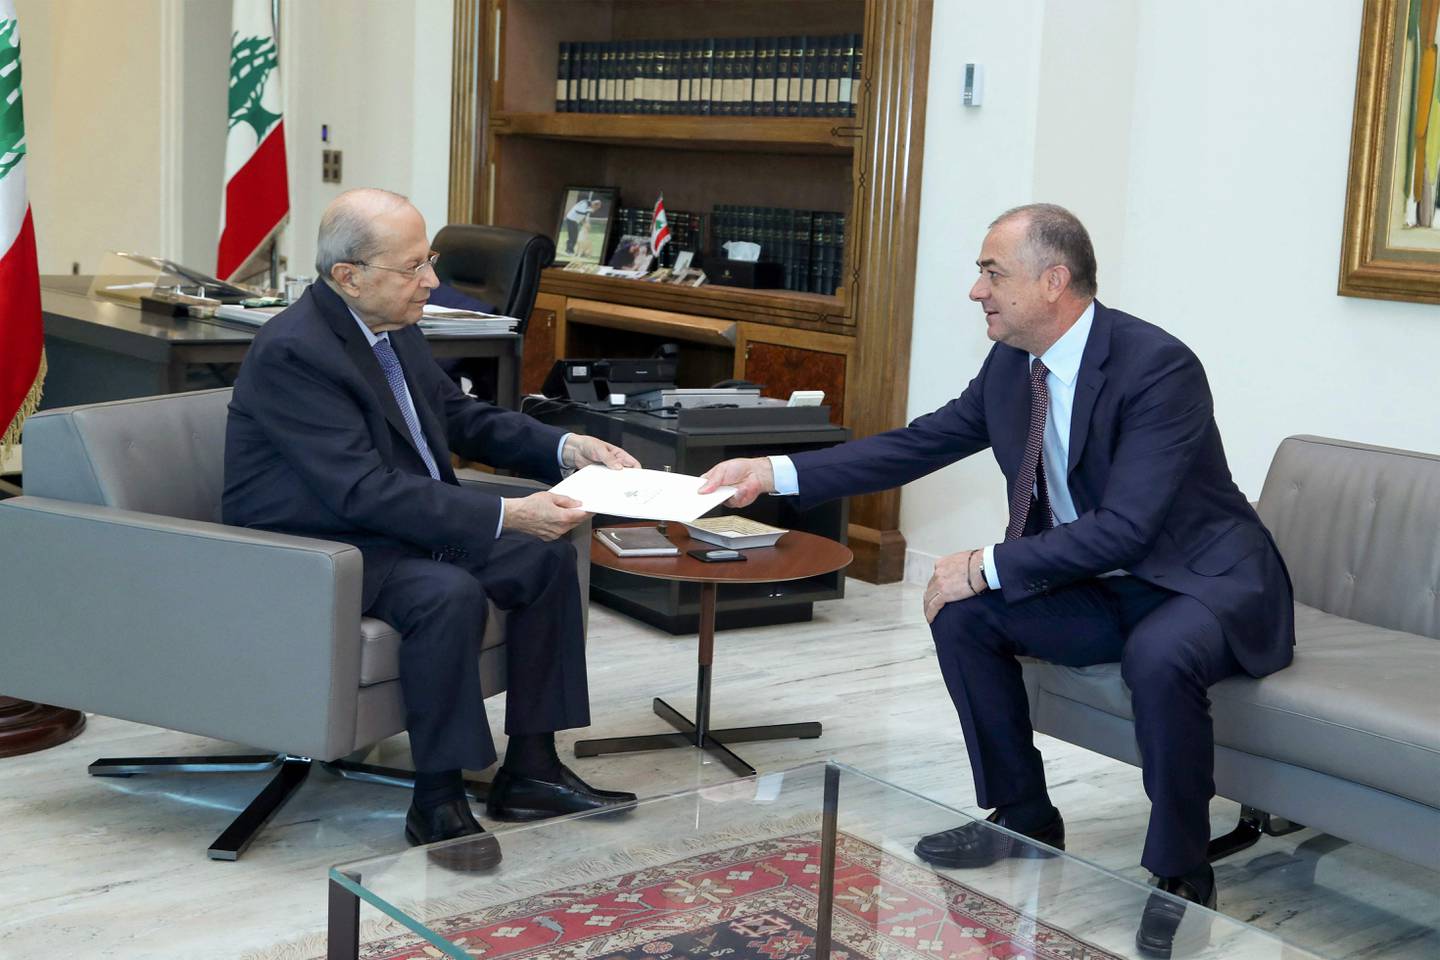 Lebanon's senior negotiator, Elias Bou Saab, hands the latest draft of a US-mediated proposal to demarcate Lebanon's maritime border with Israel to President Michel Aoun. AFP